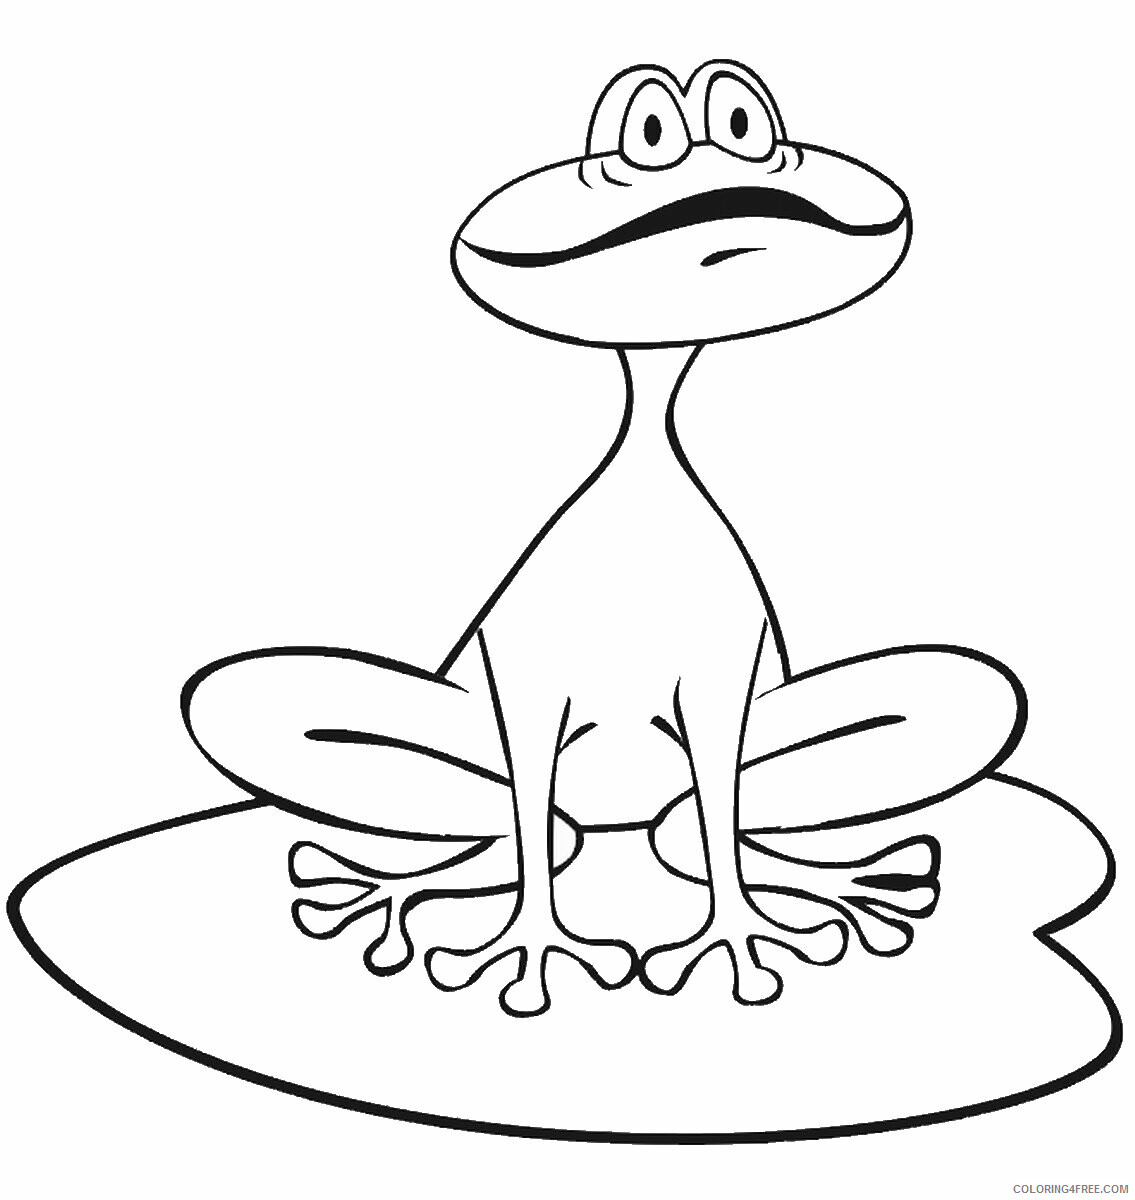 Frog Coloring Pages Animal Printable Sheets frog_cl_20 2021 2290 Coloring4free